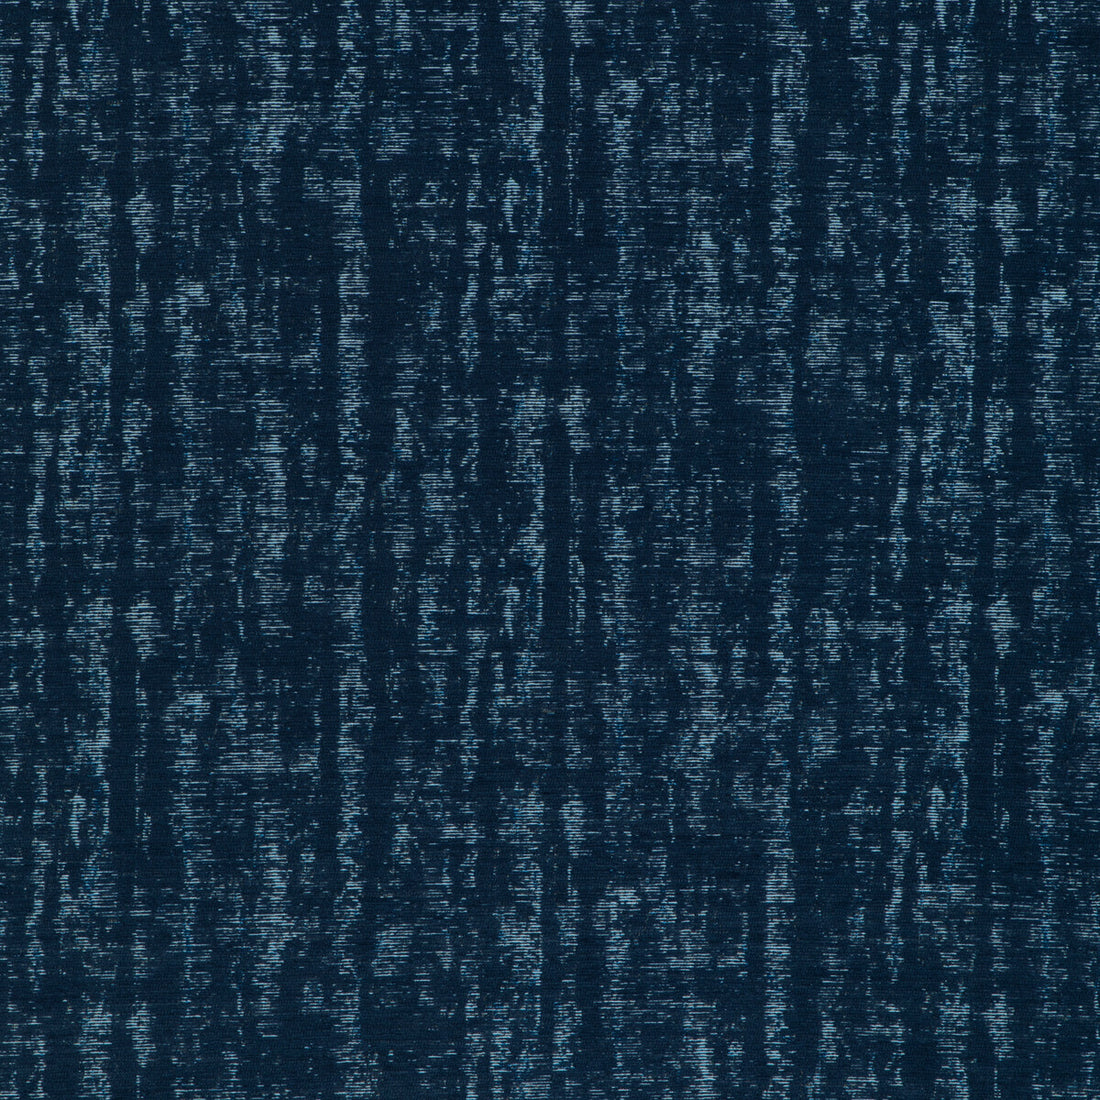 Mossi fabric in coastal color - pattern 37071.155.0 - by Kravet Contract in the Chesapeake collection